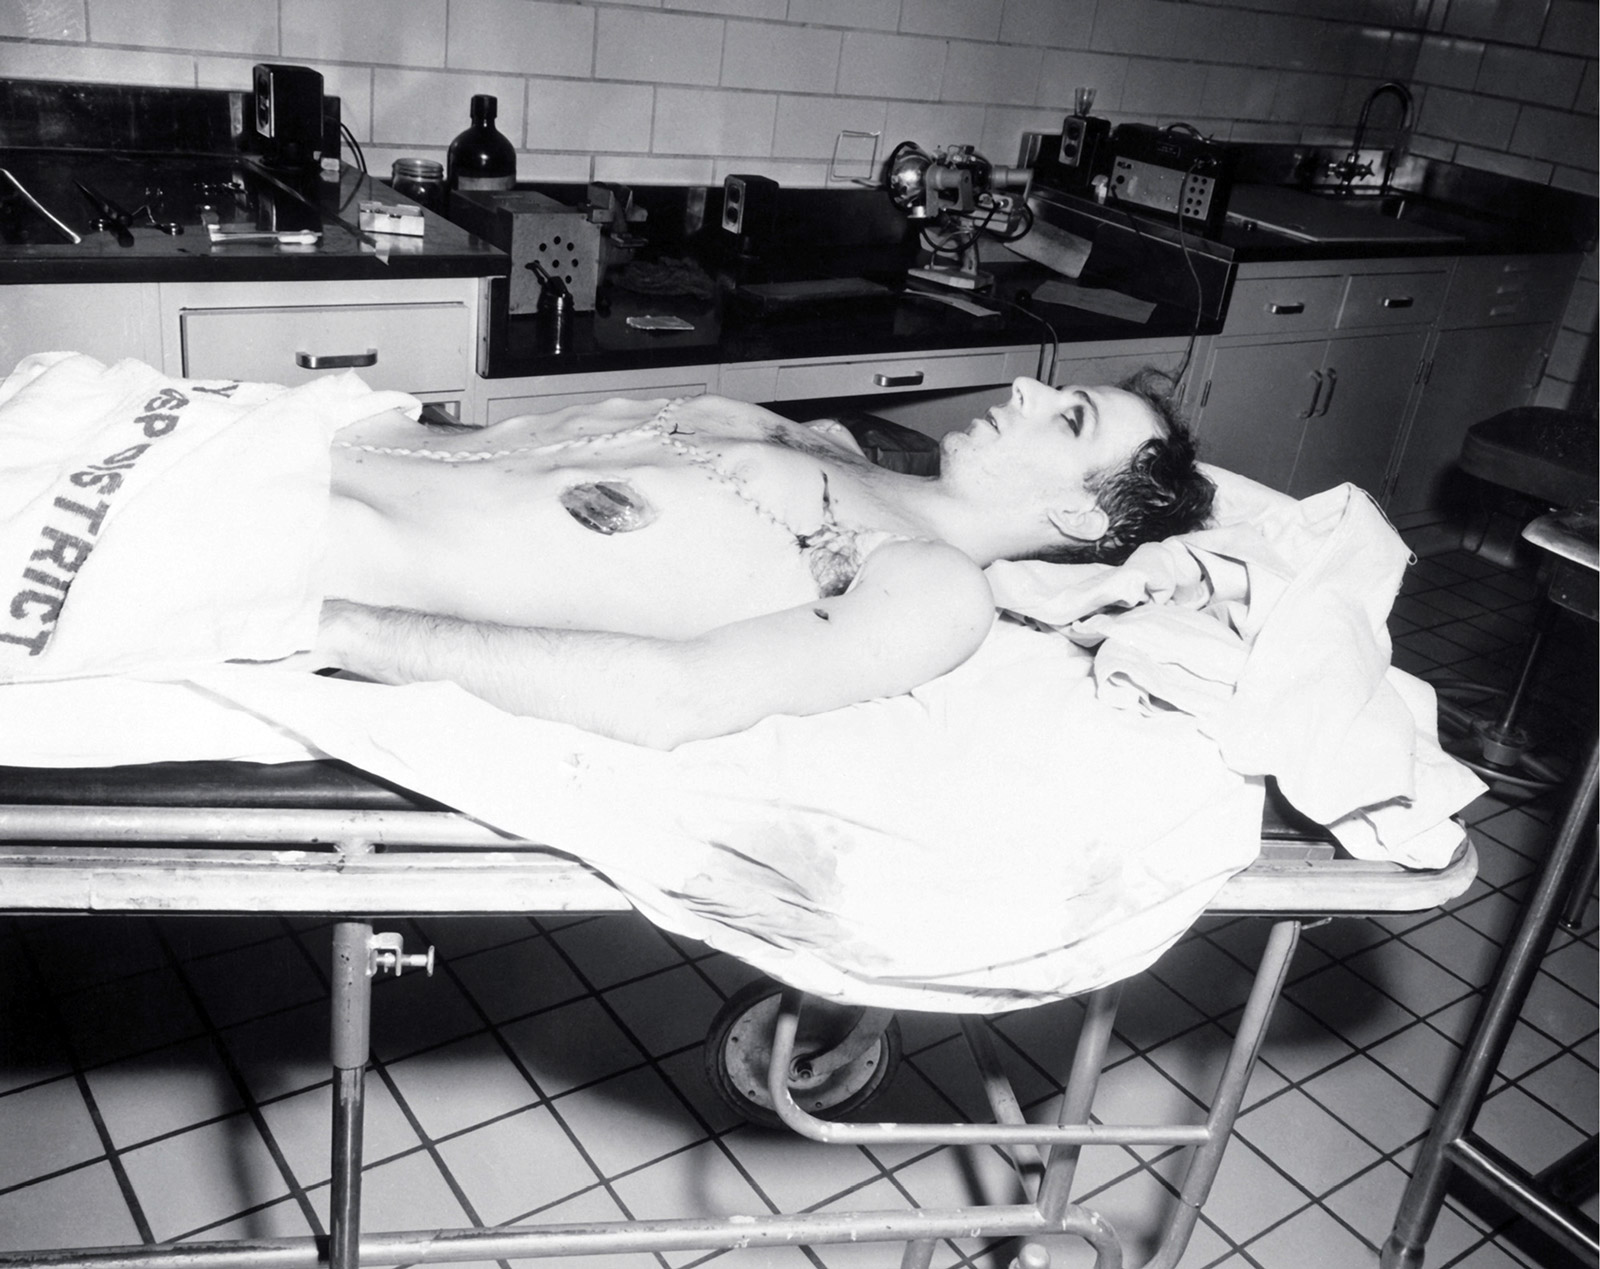 Oswald post-autopsy at Parkland Hospital in Dallas. Courtesy United States National Archives.